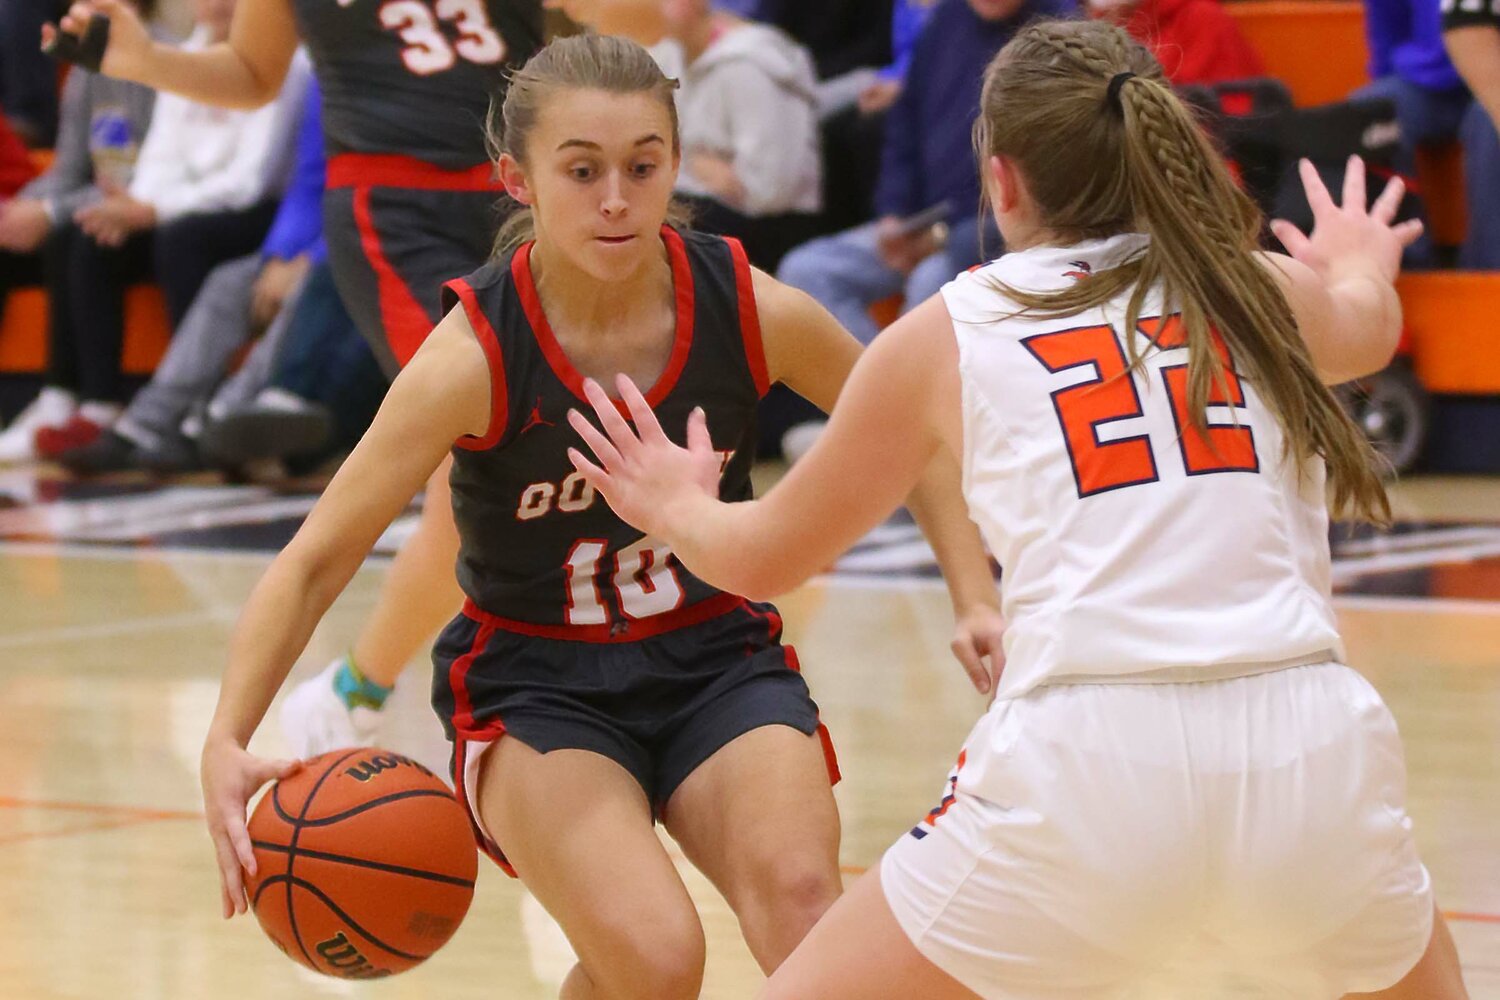 Emily LInk of Southmont - driving toward Blair Nichols of North Montgomery